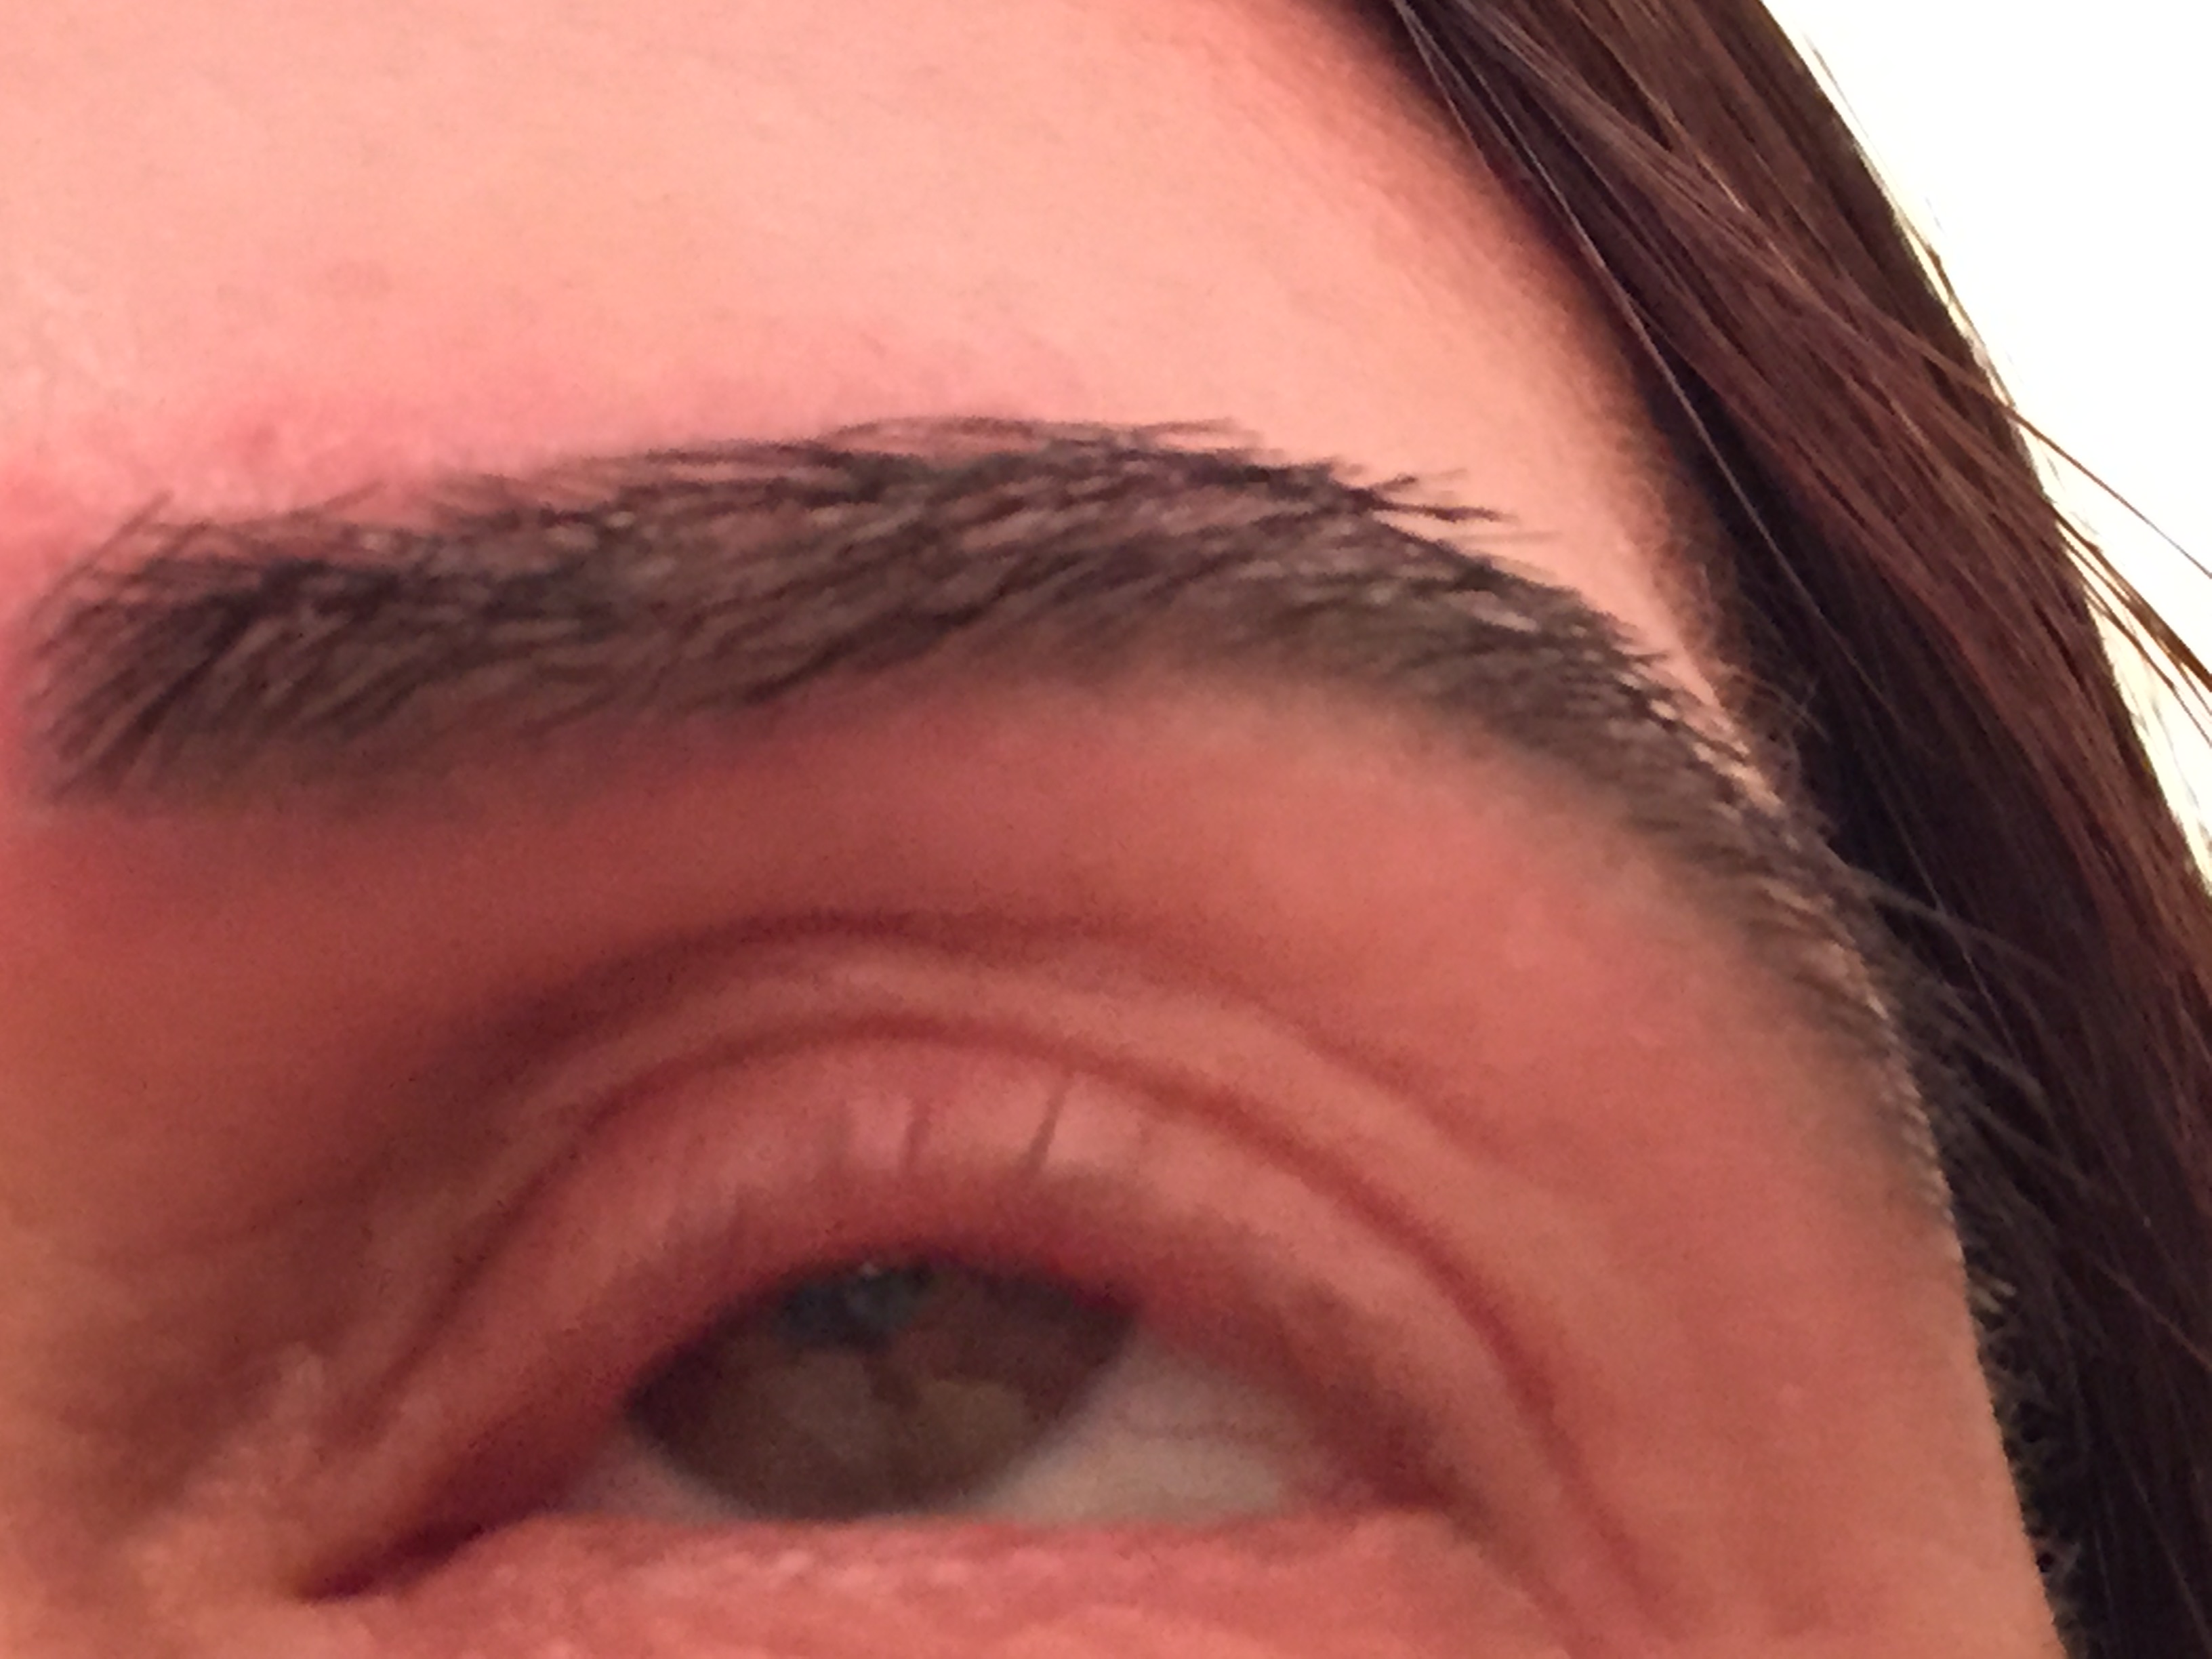 This is one week after approximately 300 grafts were placed in each eyebrow to correct a botched eyebrow transplant procedure.